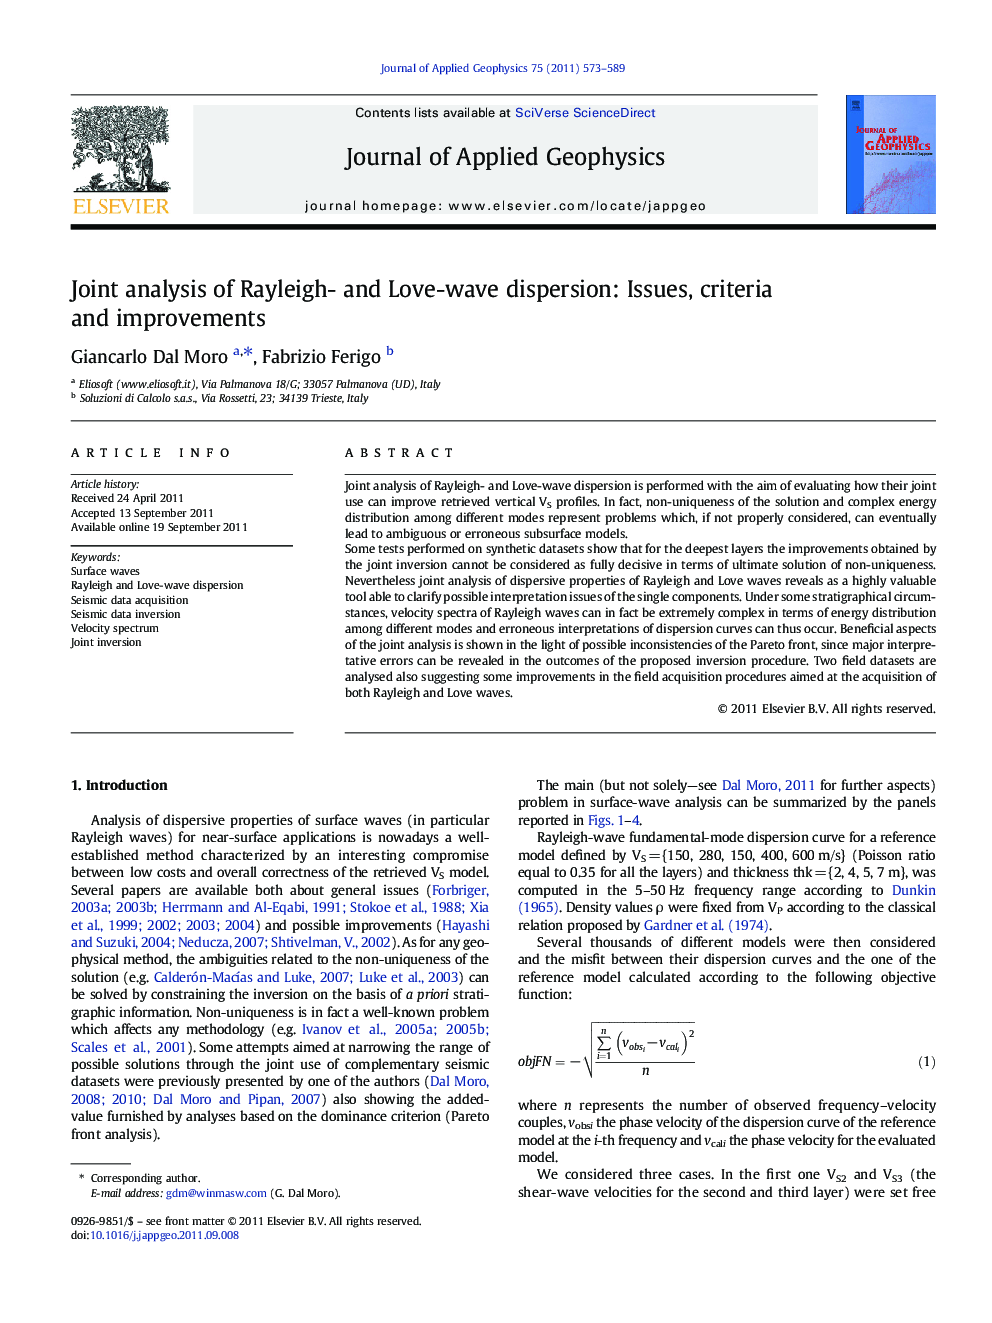 Joint analysis of Rayleigh- and Love-wave dispersion: Issues, criteria and improvements